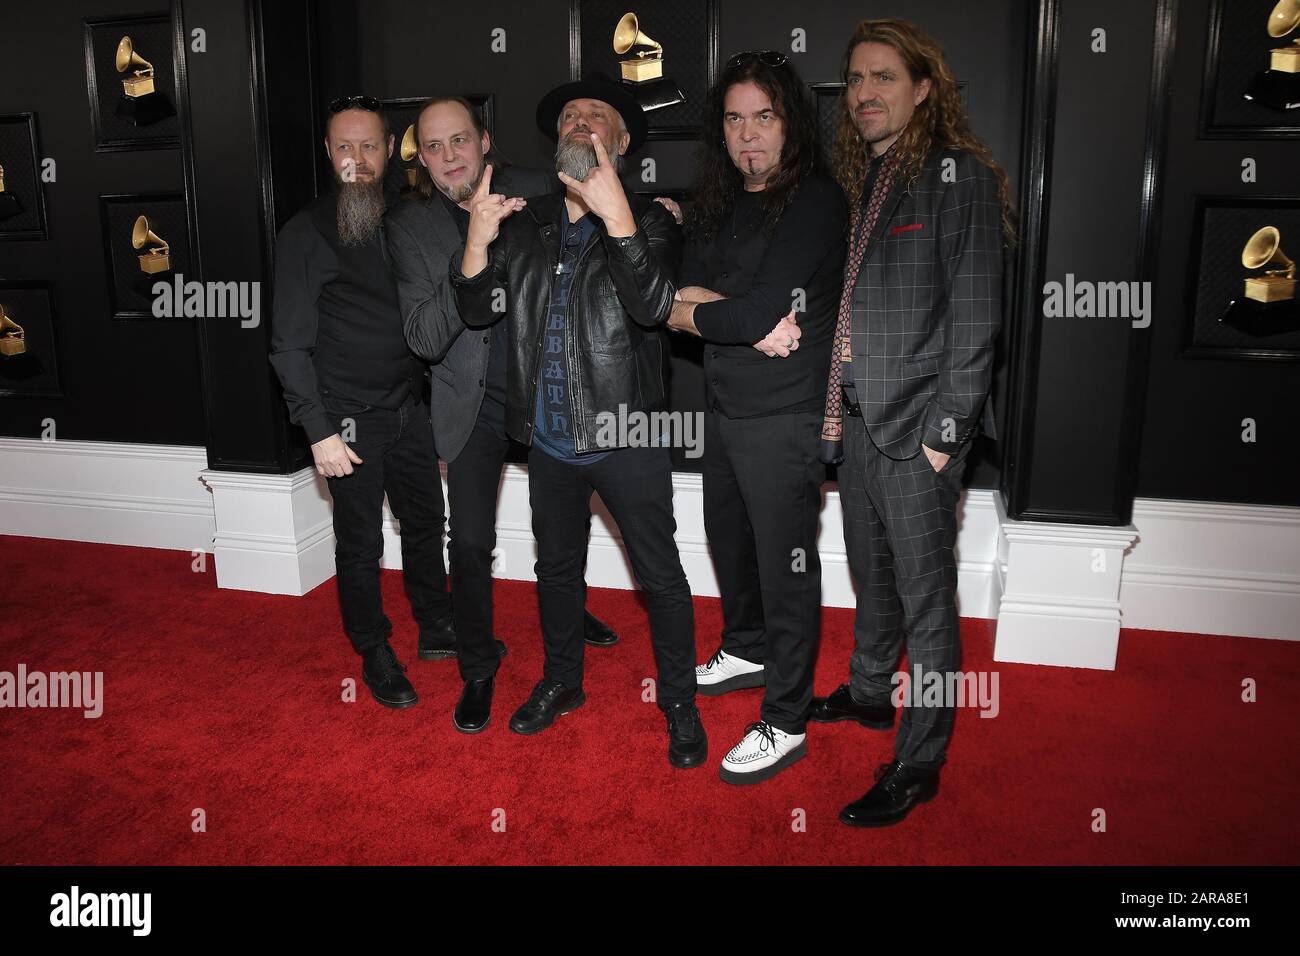 Los Angeles, CA, USA. 26th Jan 2020. Jan Lindh, Lars Johansson, Leif Edling, Bjšrkman, Johan LŠngqvist of Candlemass arrive at the 62nd Annual Grammy Awards red carpet held at the Staples Center on January 26, 2020 in Los Angeles, California, United States. (Photo by Sthanlee B. Mirador/Sipa USA) Credit: Sipa USA/Alamy Live News Stock Photo